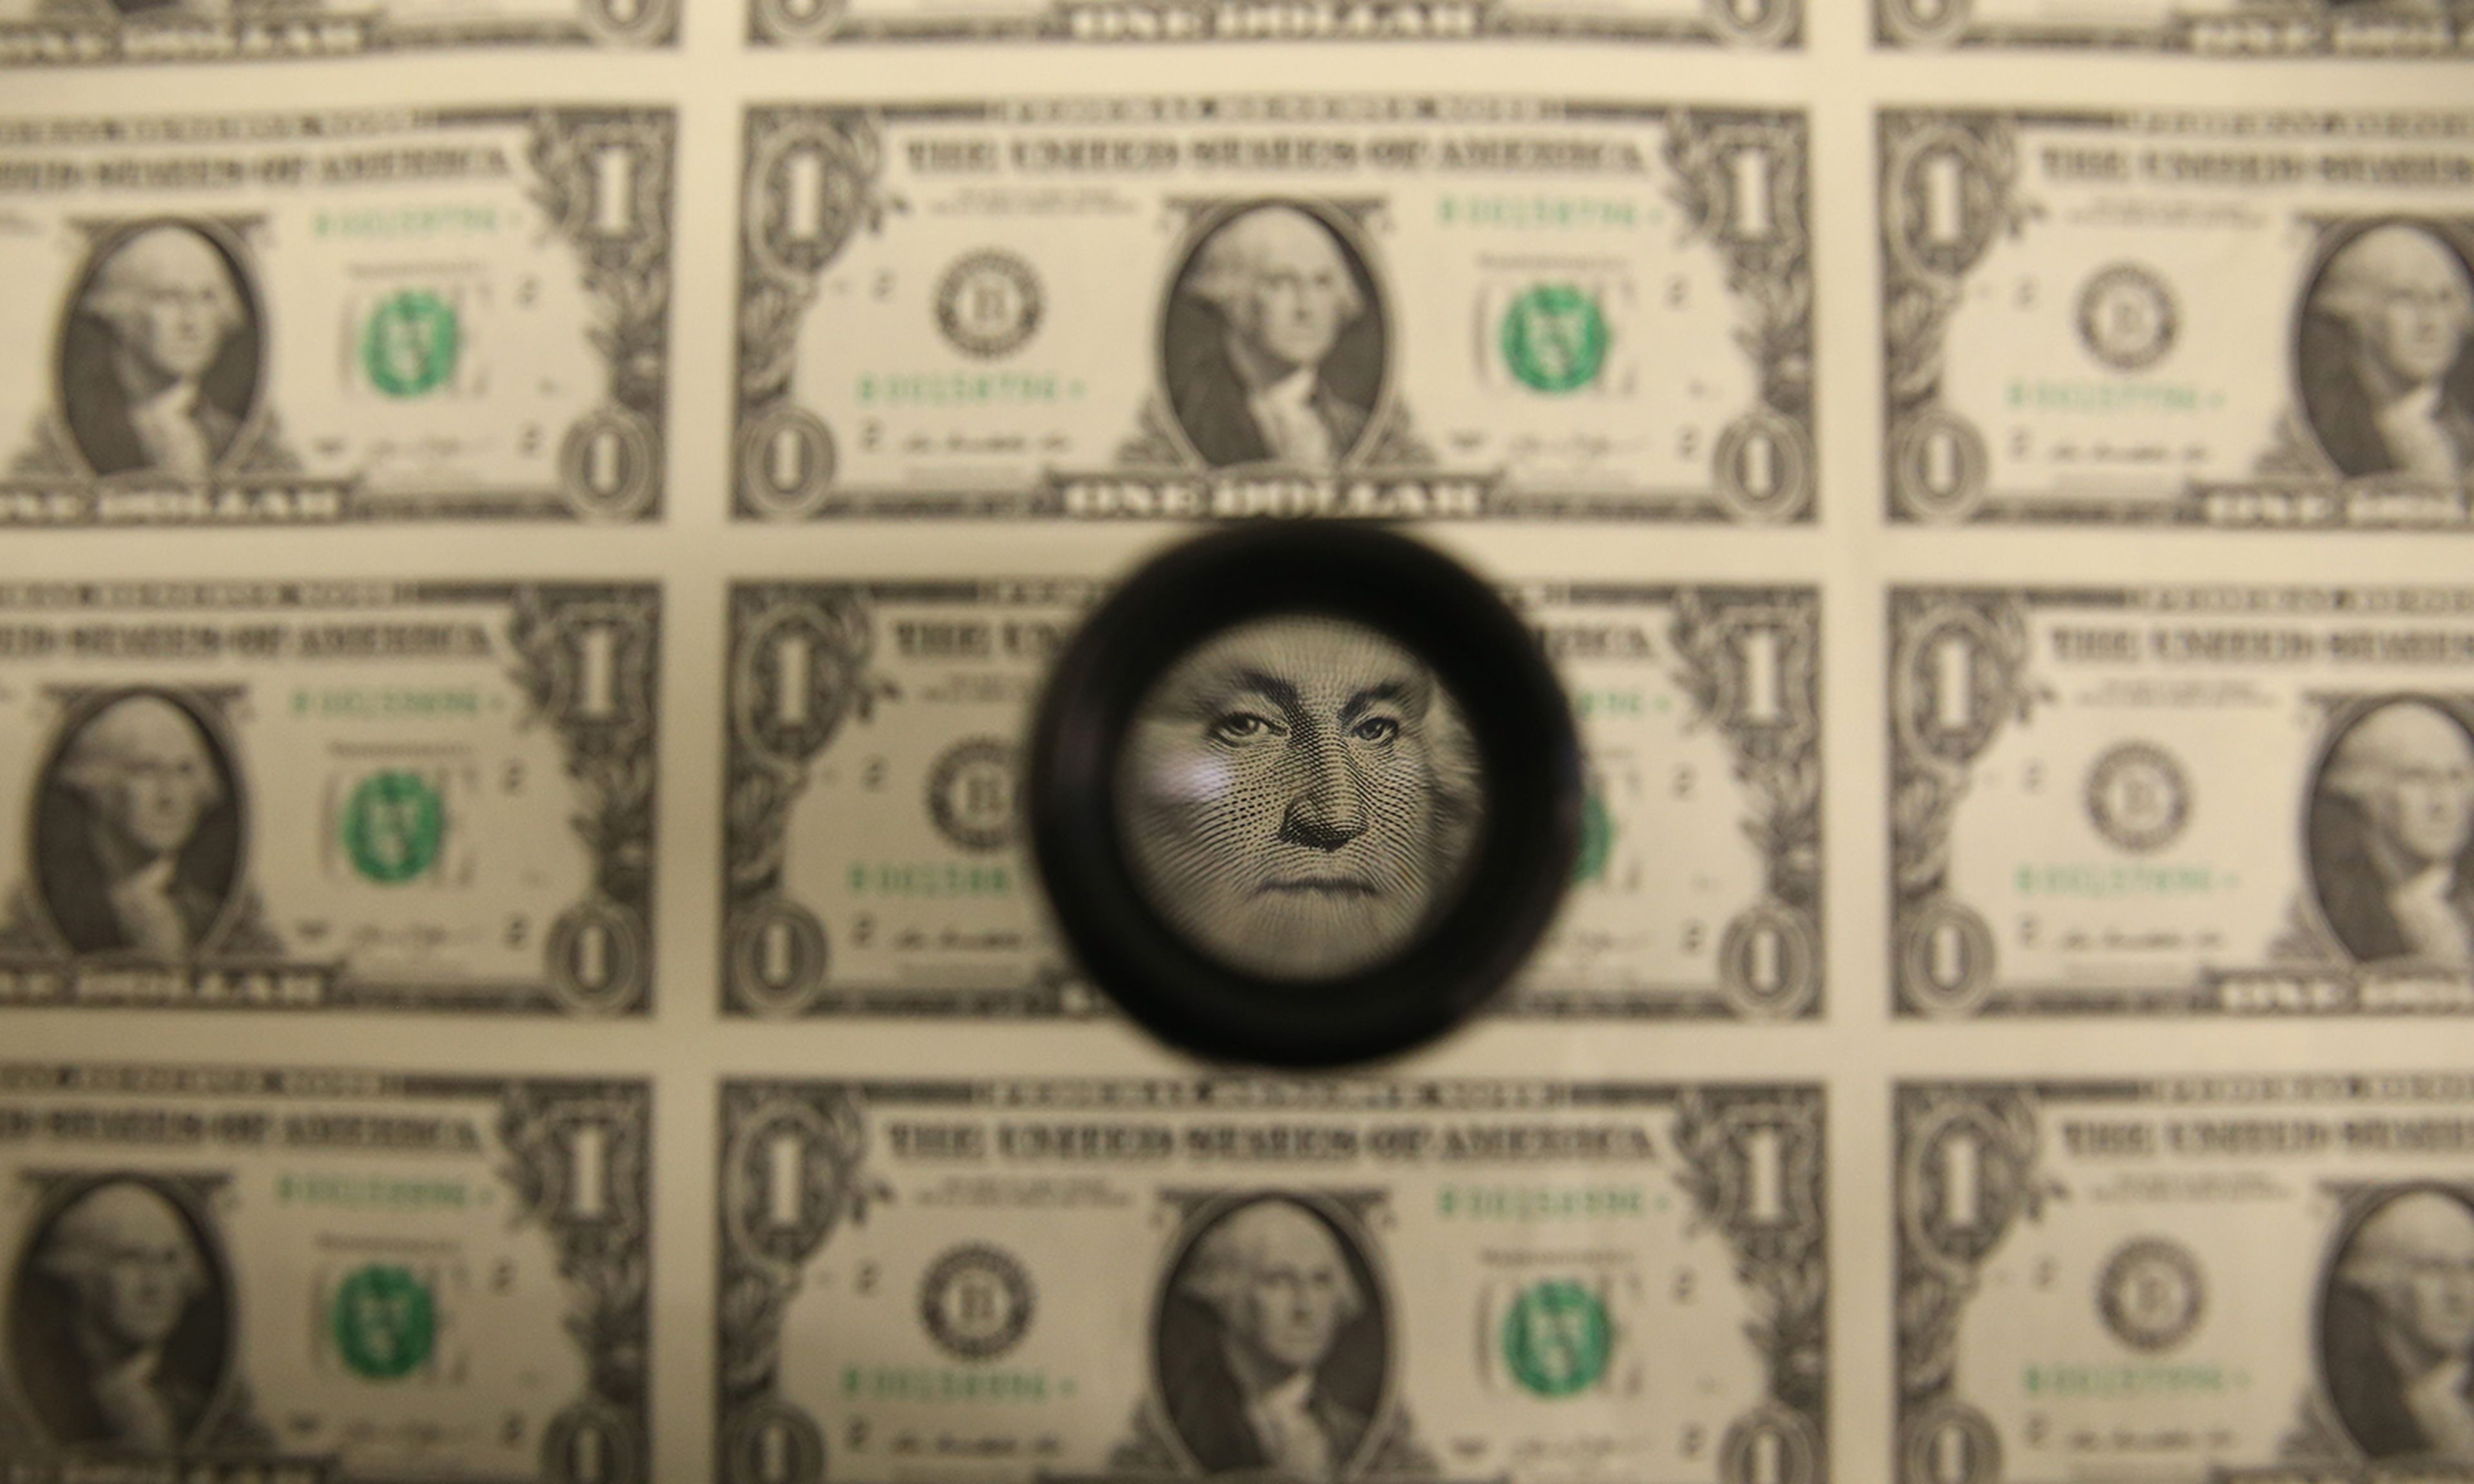 A magnifying glass is used to inspect newly printed one dollar bills at the Bureau of Engraving and Printing on March 24, 2015, in Washington. (Photo by Mark Wilson/Getty Images)